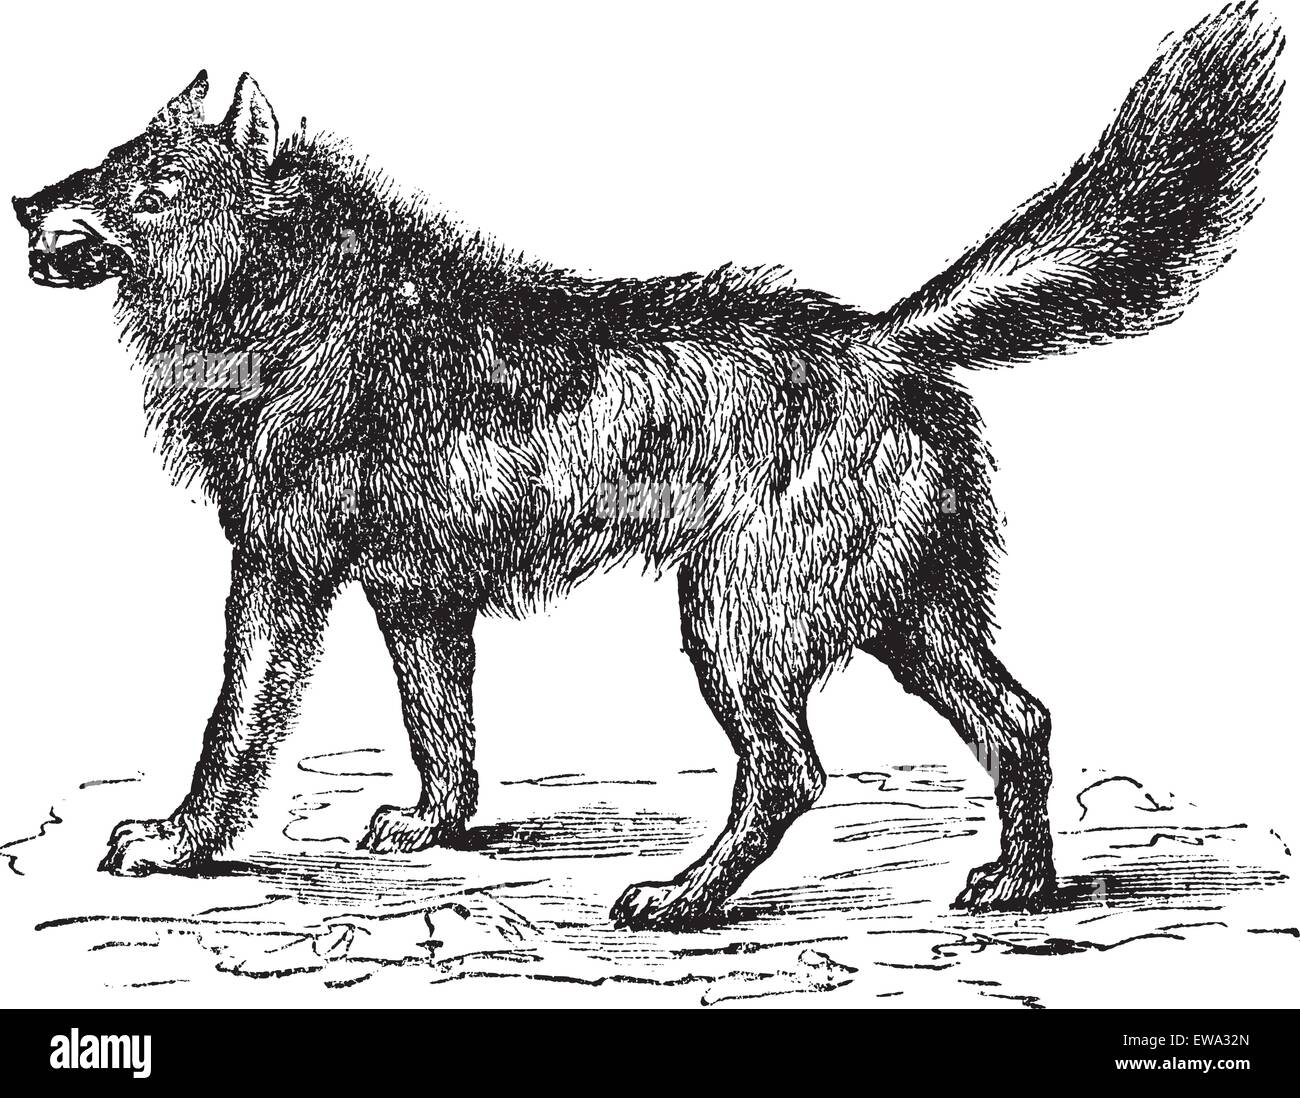 Eurasian Wolf or Canis lupus lupus or European, Common or Forest Wolf or Altaicus or lycaon or Grey wolf, vintage engraving. Old engraved illustration of Eurasian Wolf. Stock Vector